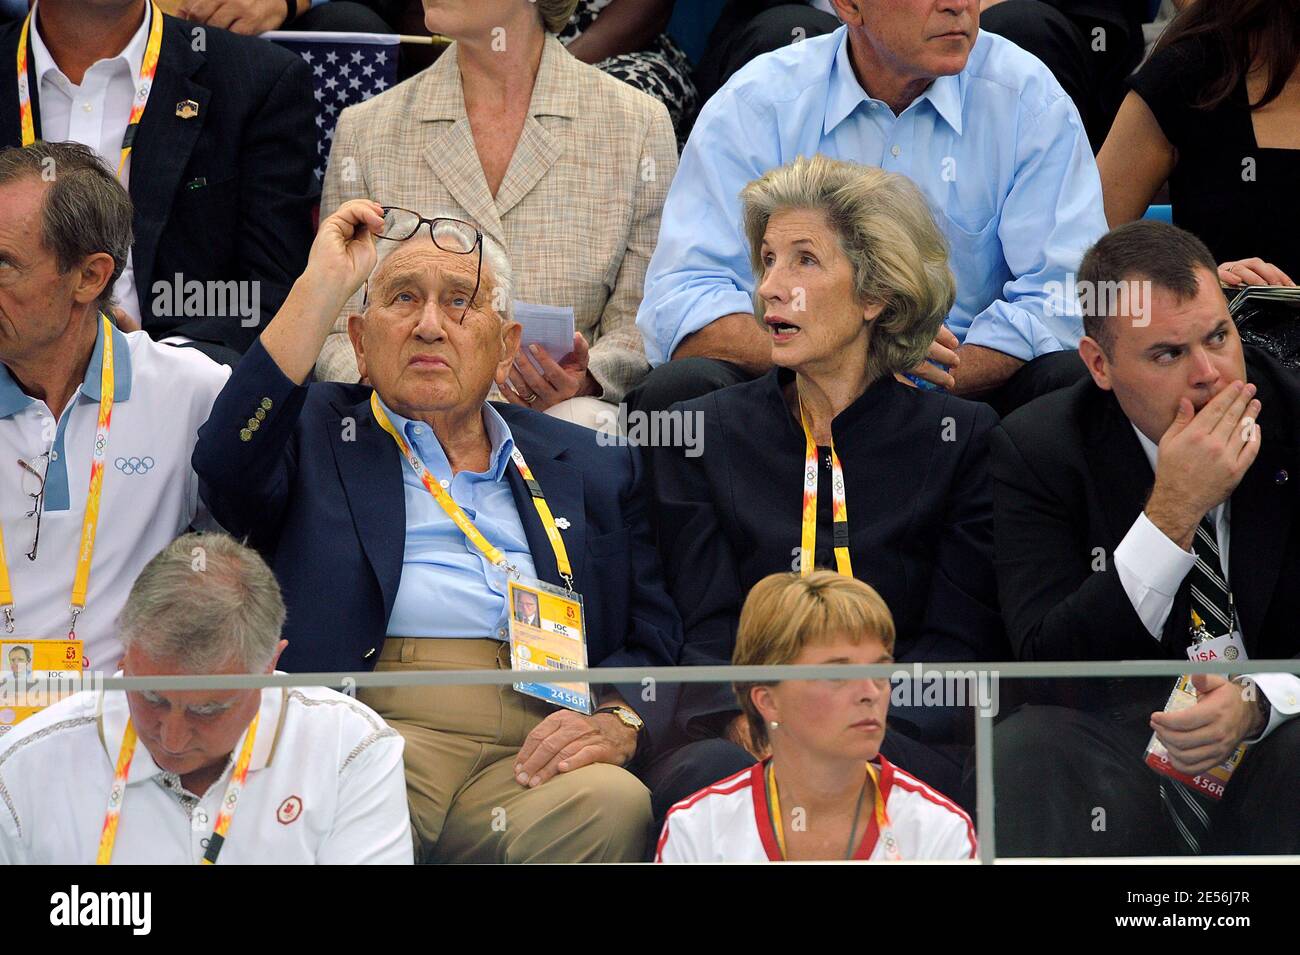 Former National Security Advisor and Secretary of State Henry Kissinger and wife Nancy attend the swimming finals at the Olympic National aquatic center day 2 of the XXIX Olympic games in Beijing, China on August 10, 2008. Photo by Gouhier-Hahn-Nebinger/Cameleon/ABACAPRESS.COM Stock Photo